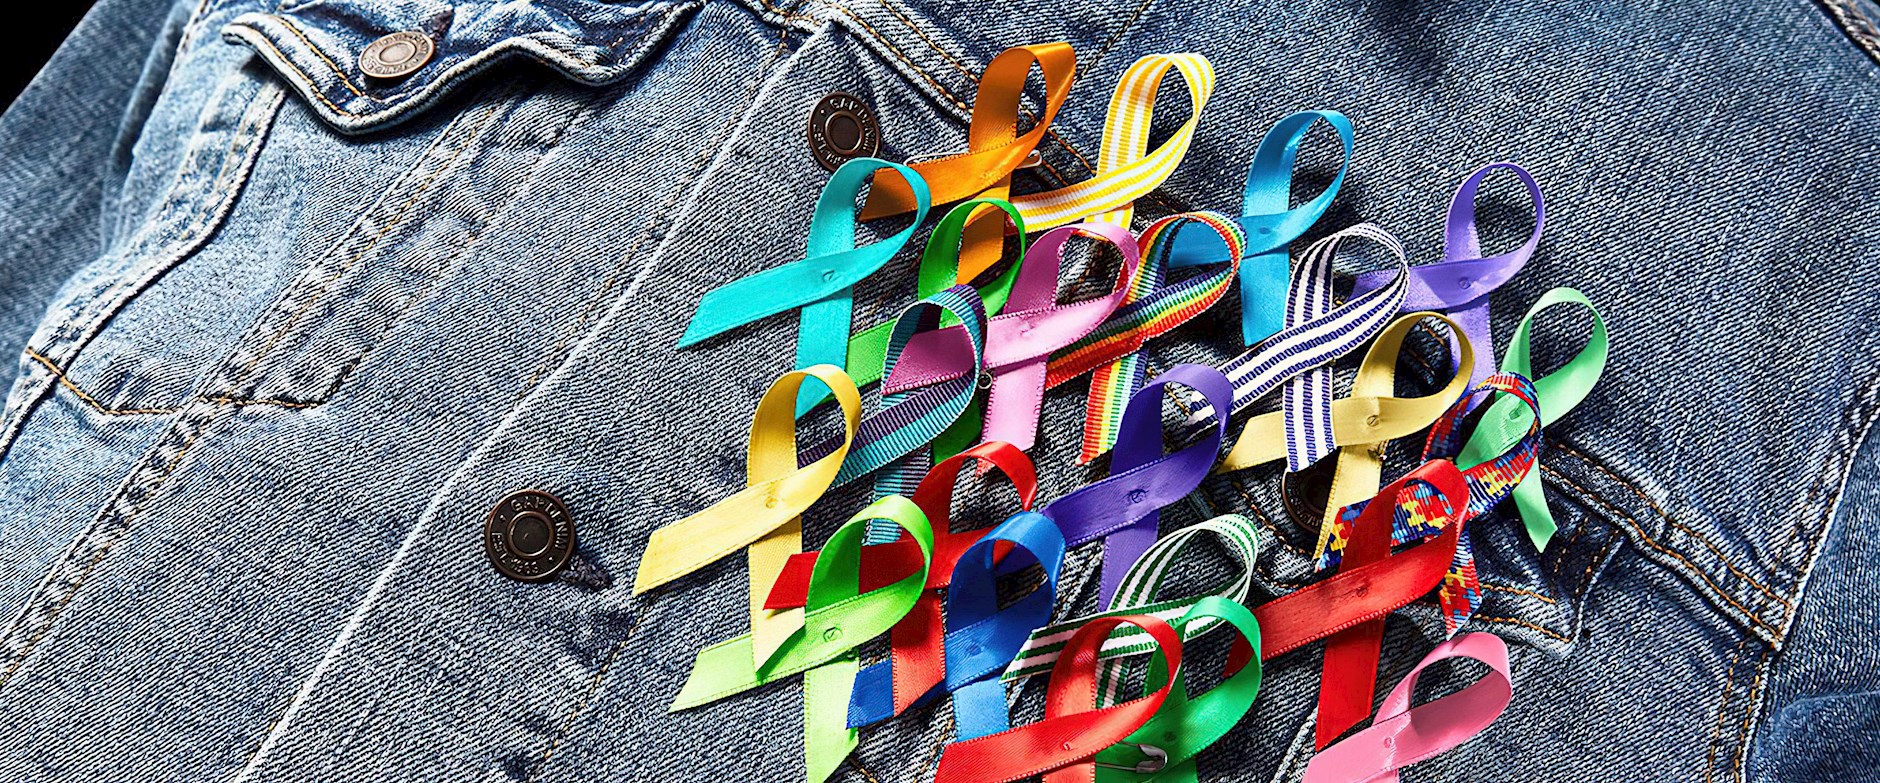 Jean jacket covered in awareness ribbons